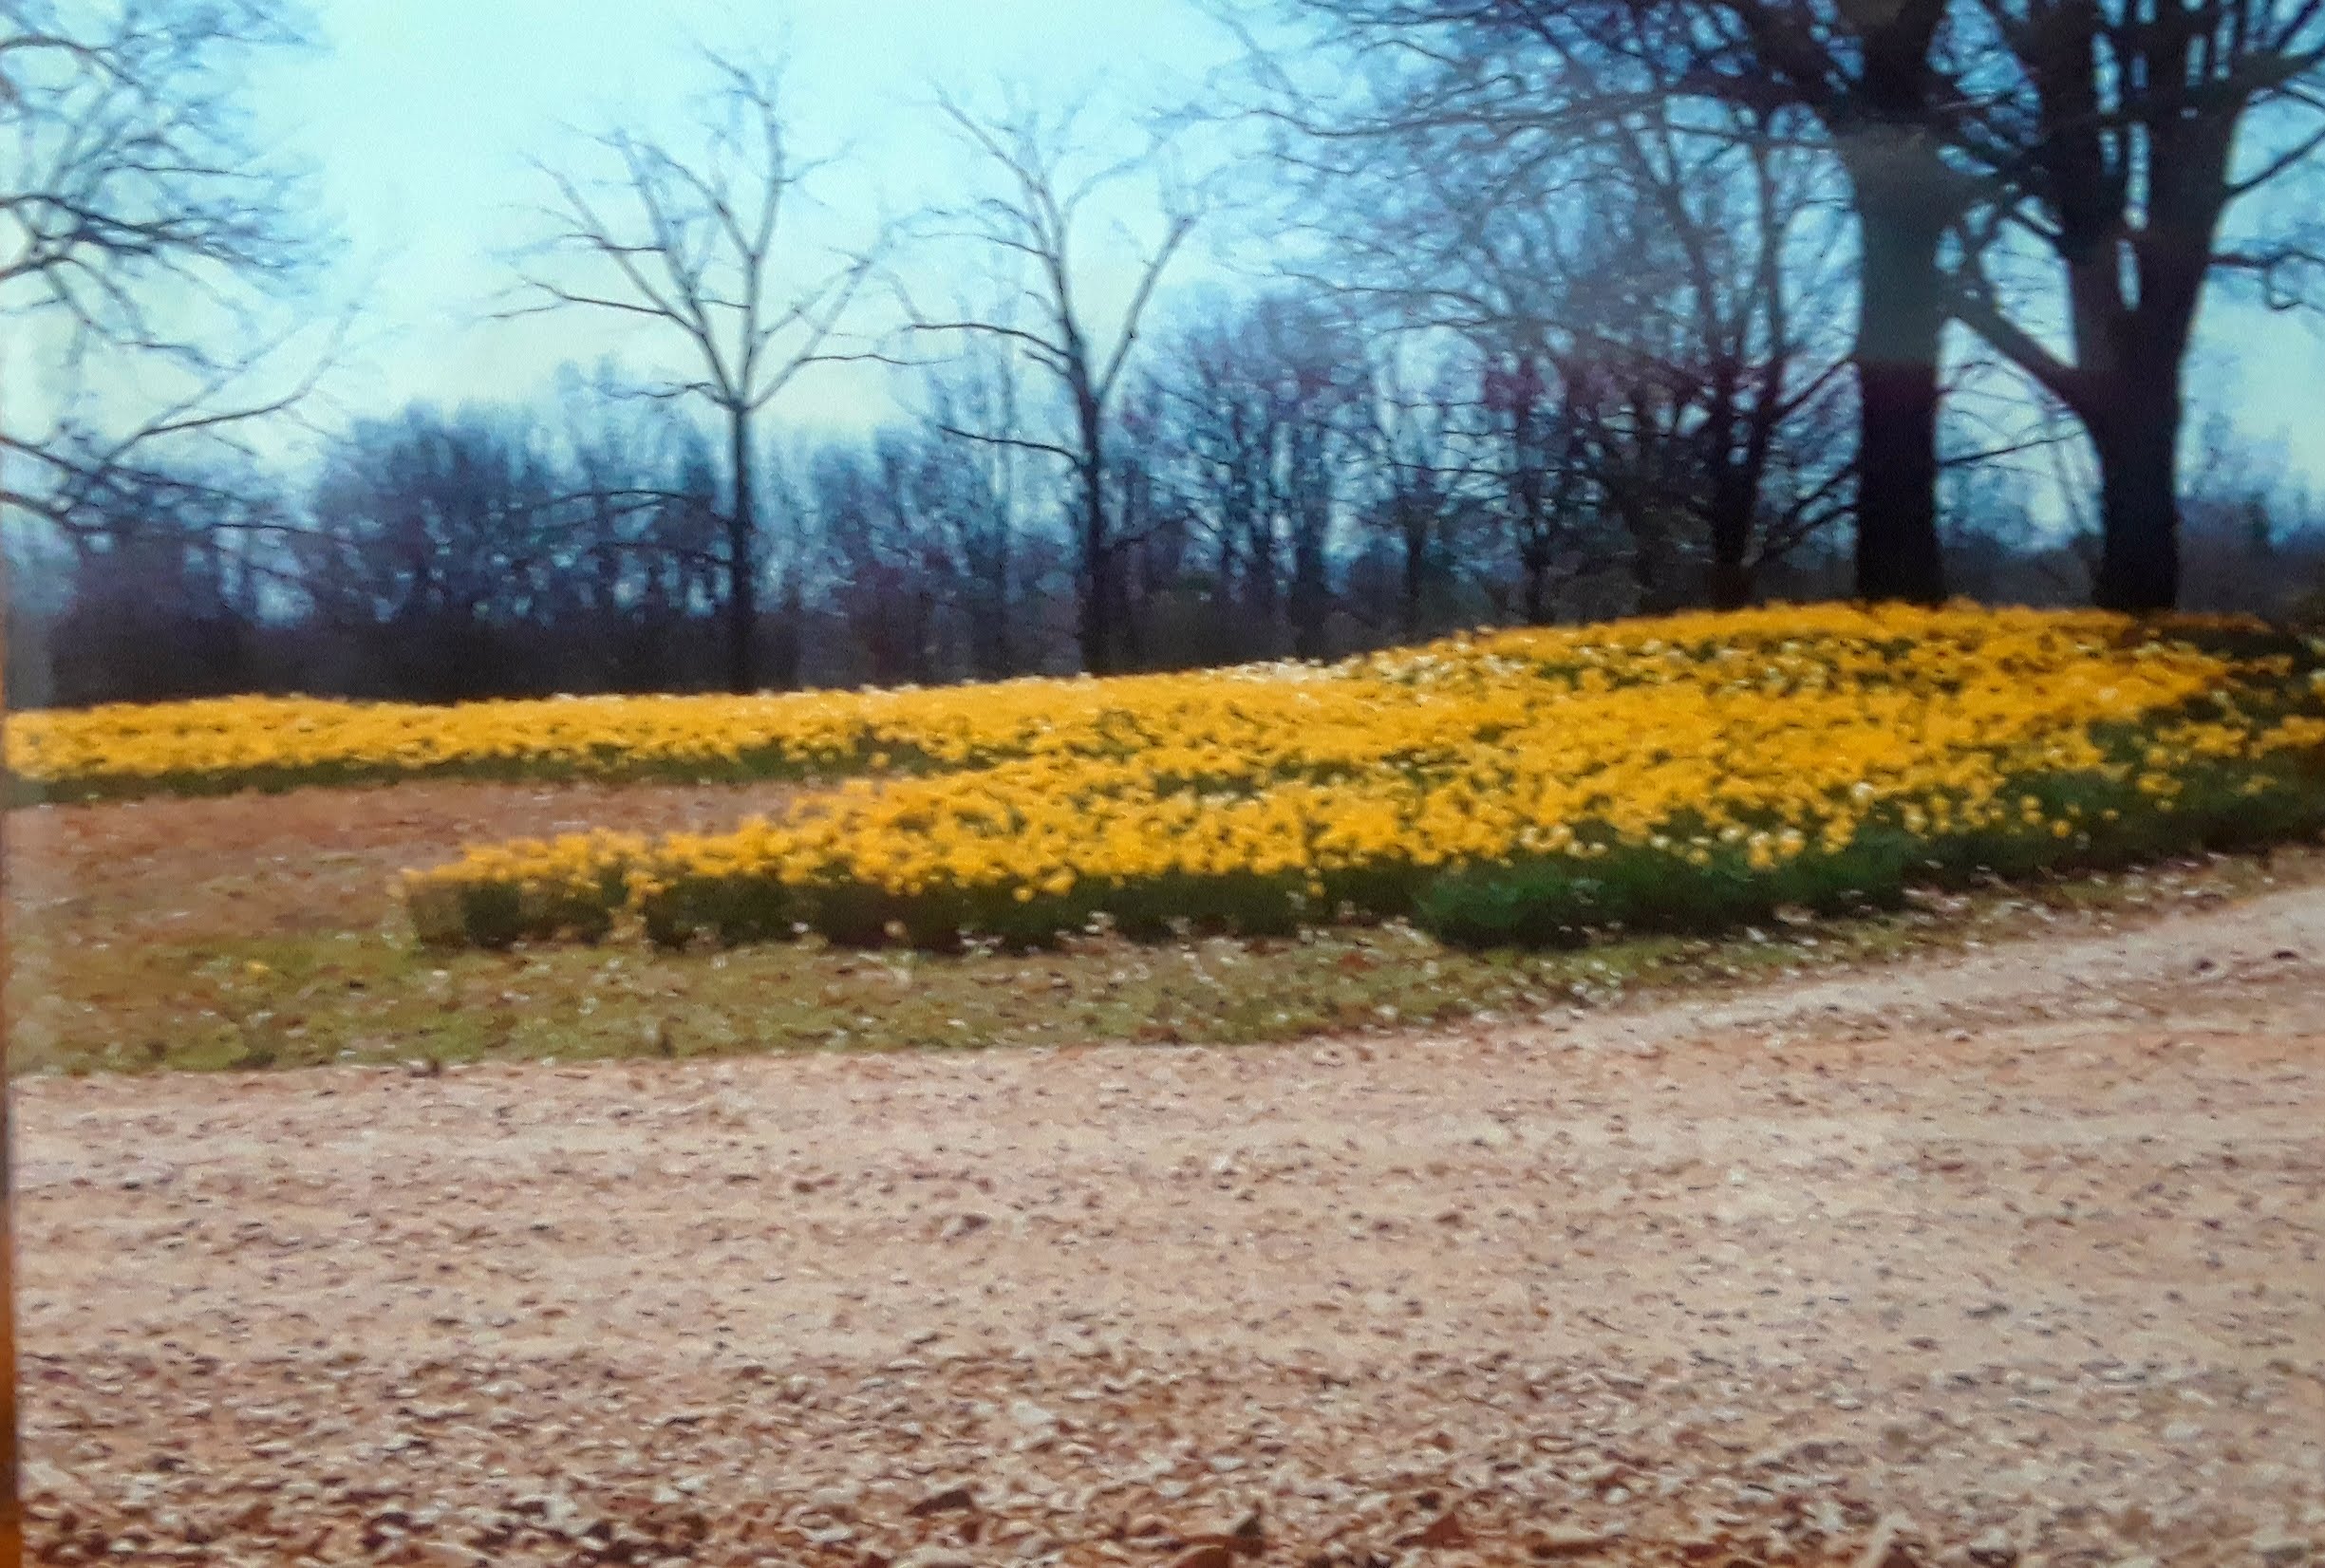 Daffodils in bloom on a small hill behind a gravel road.